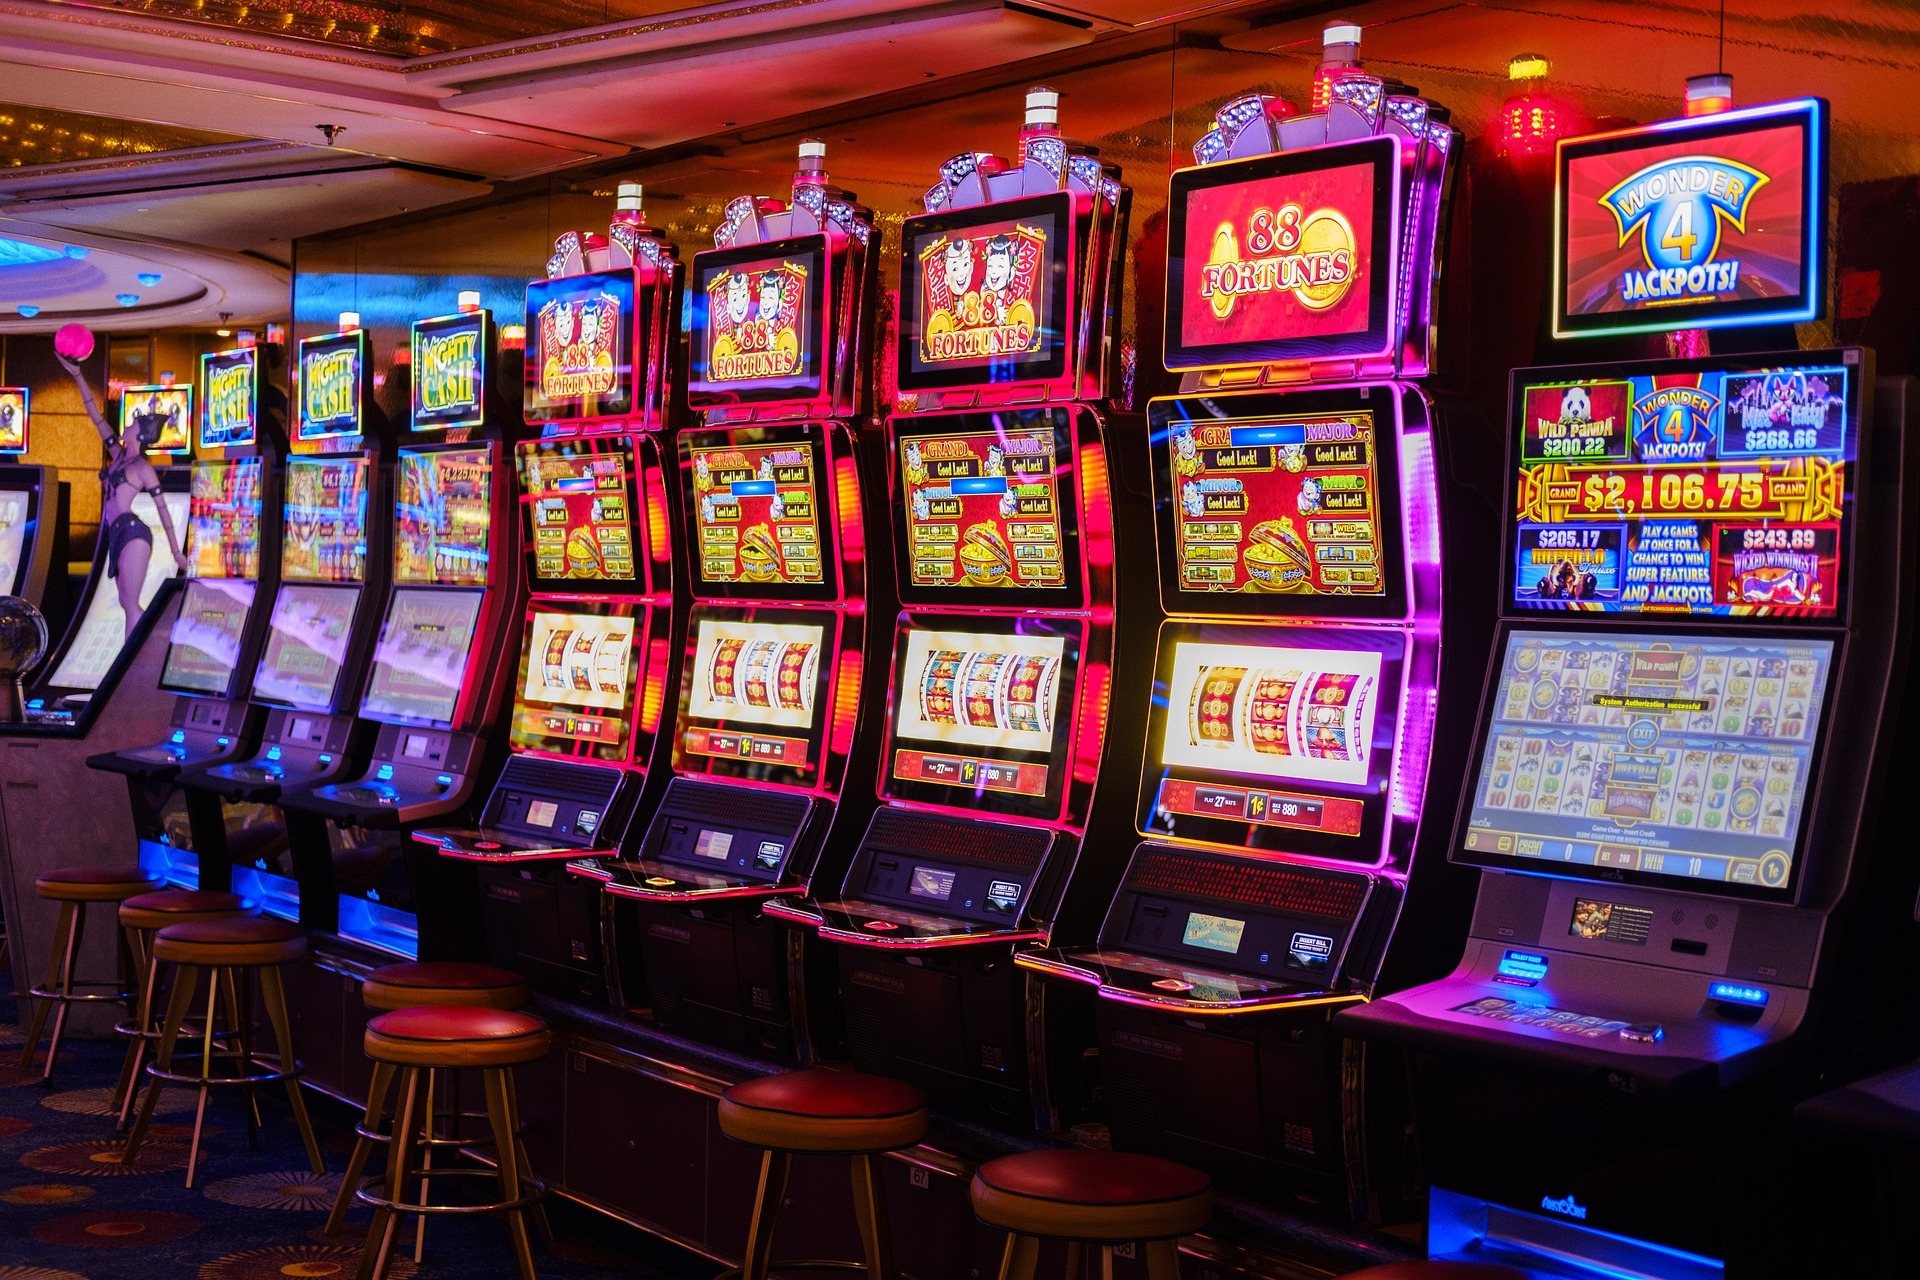 Why Do The Speculators Prefer Online Slots Over Anything Else?